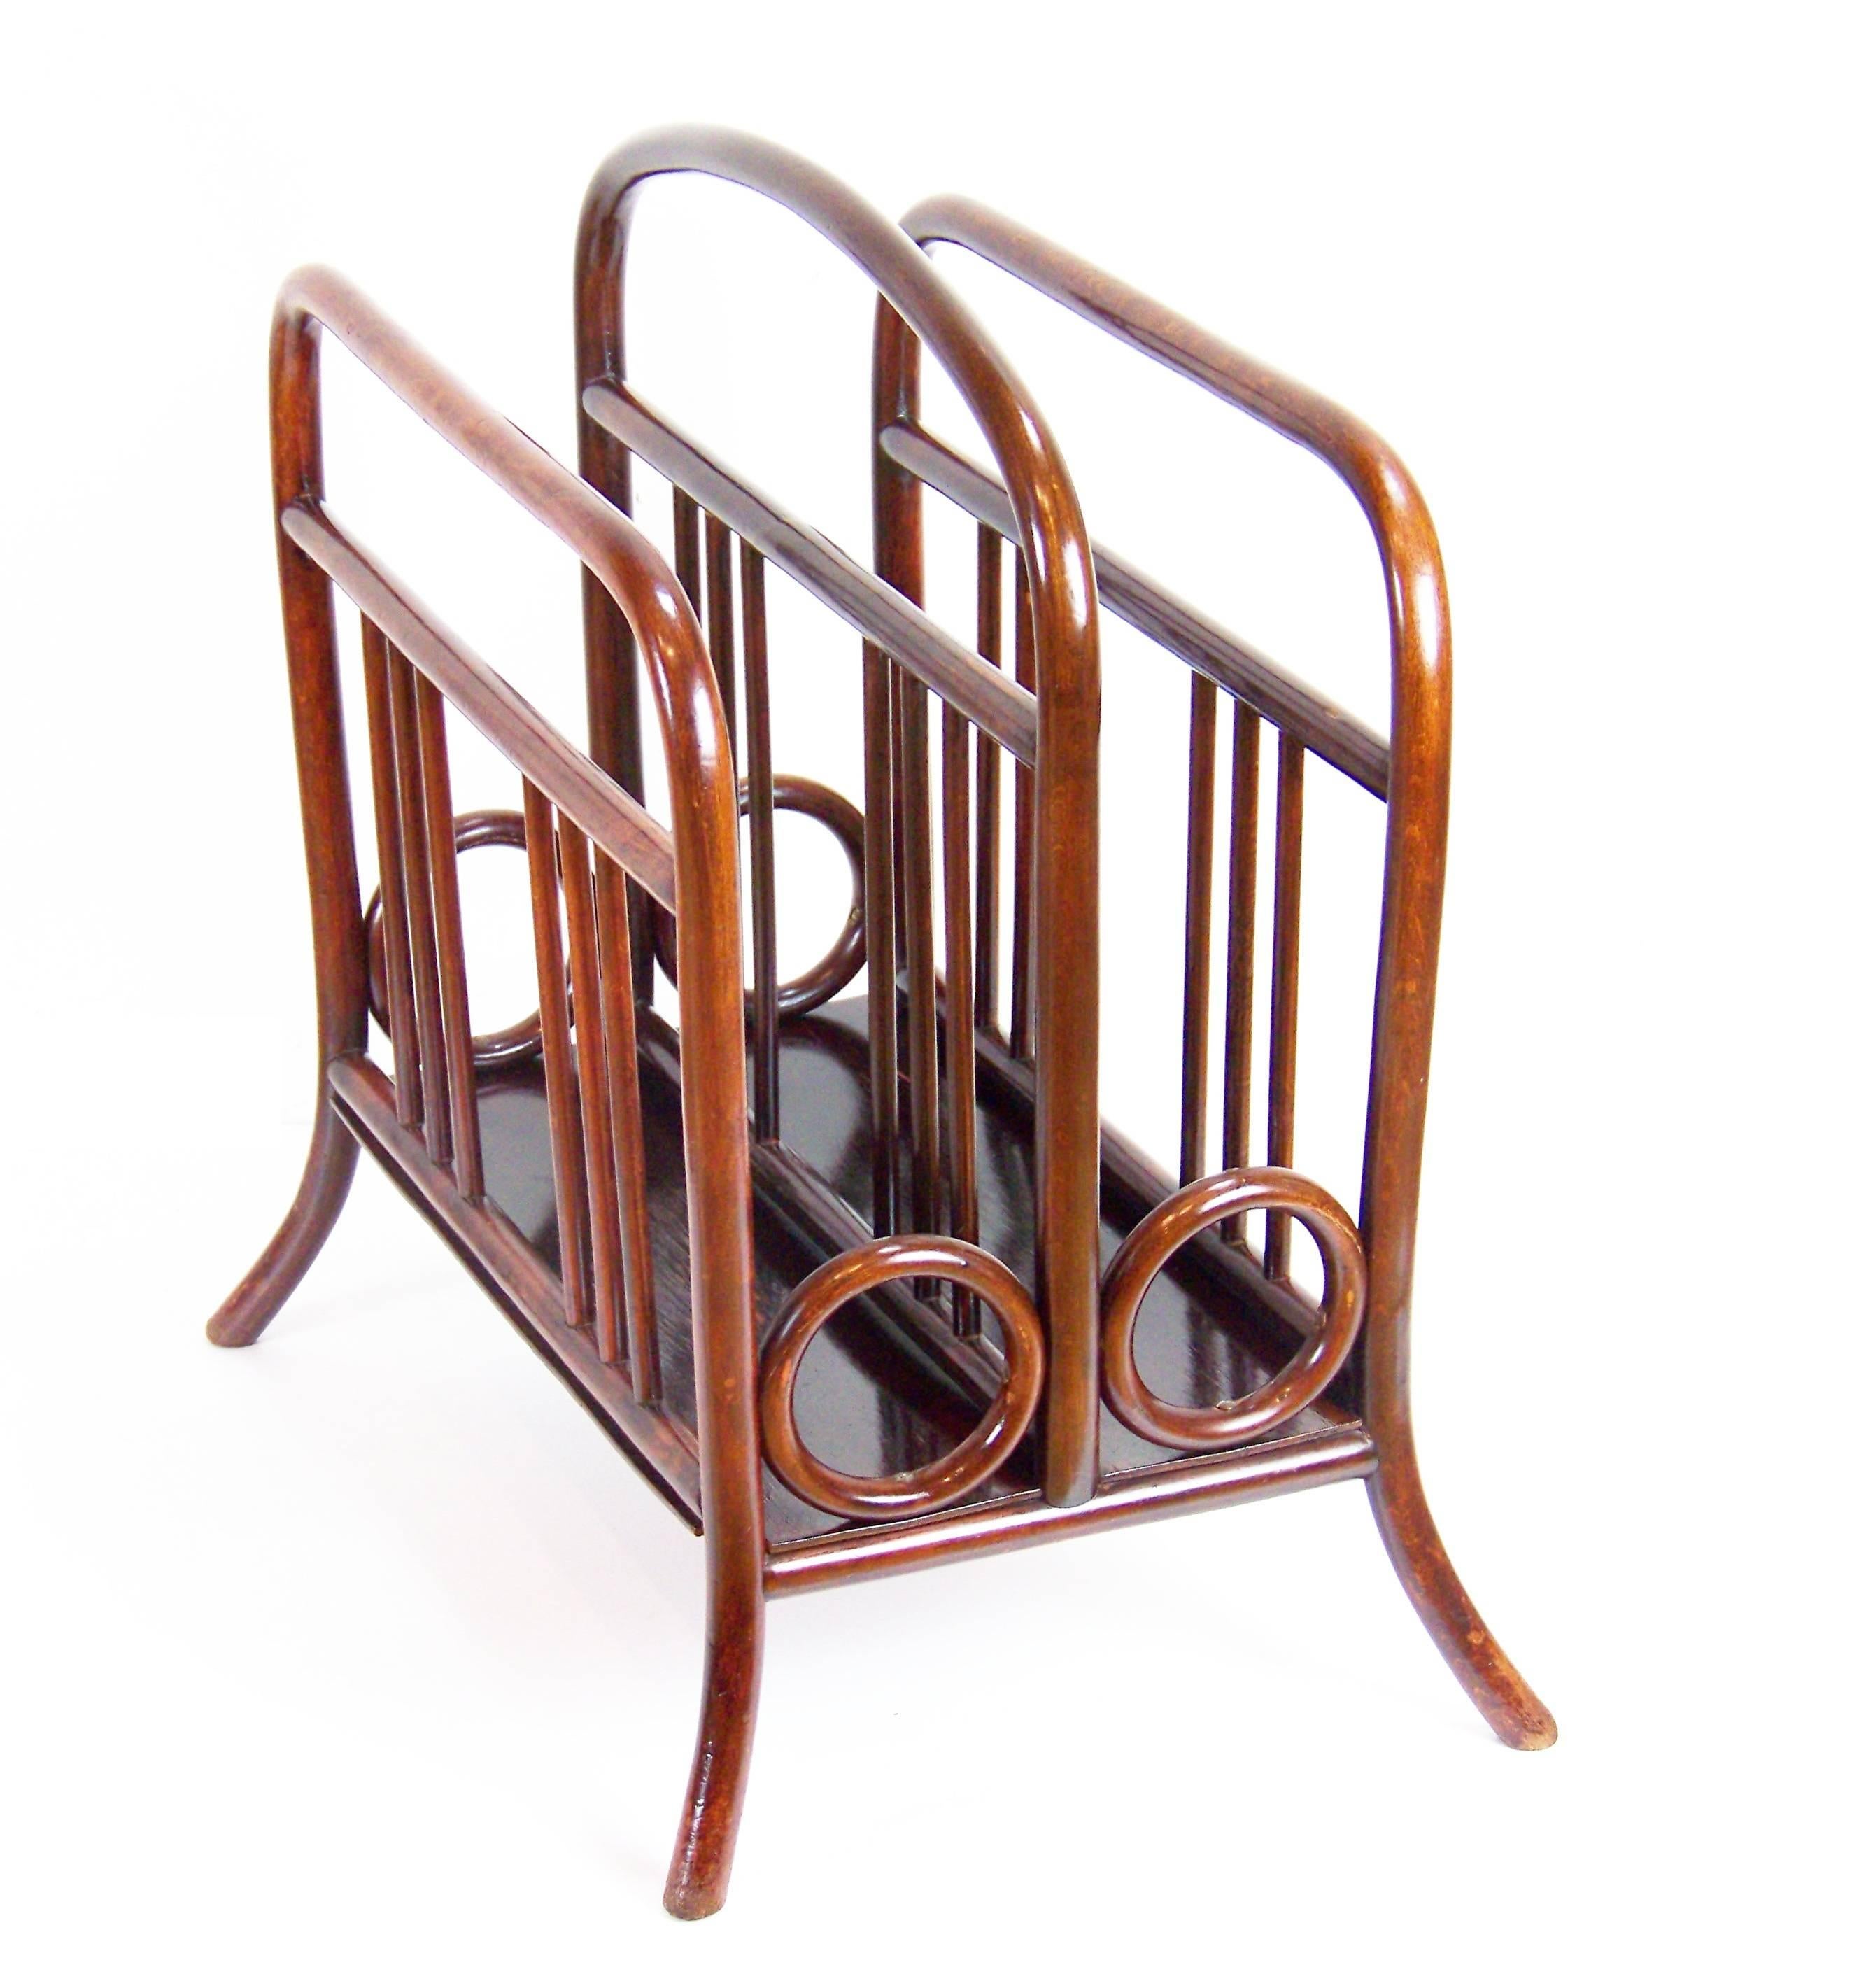 Designed in 1904 in Austrian company Gebrüder Thonet. Labelled with label Thonet, used after 1881- 1918. Original state. Cleaned and gentle re-polished with shellack finish.